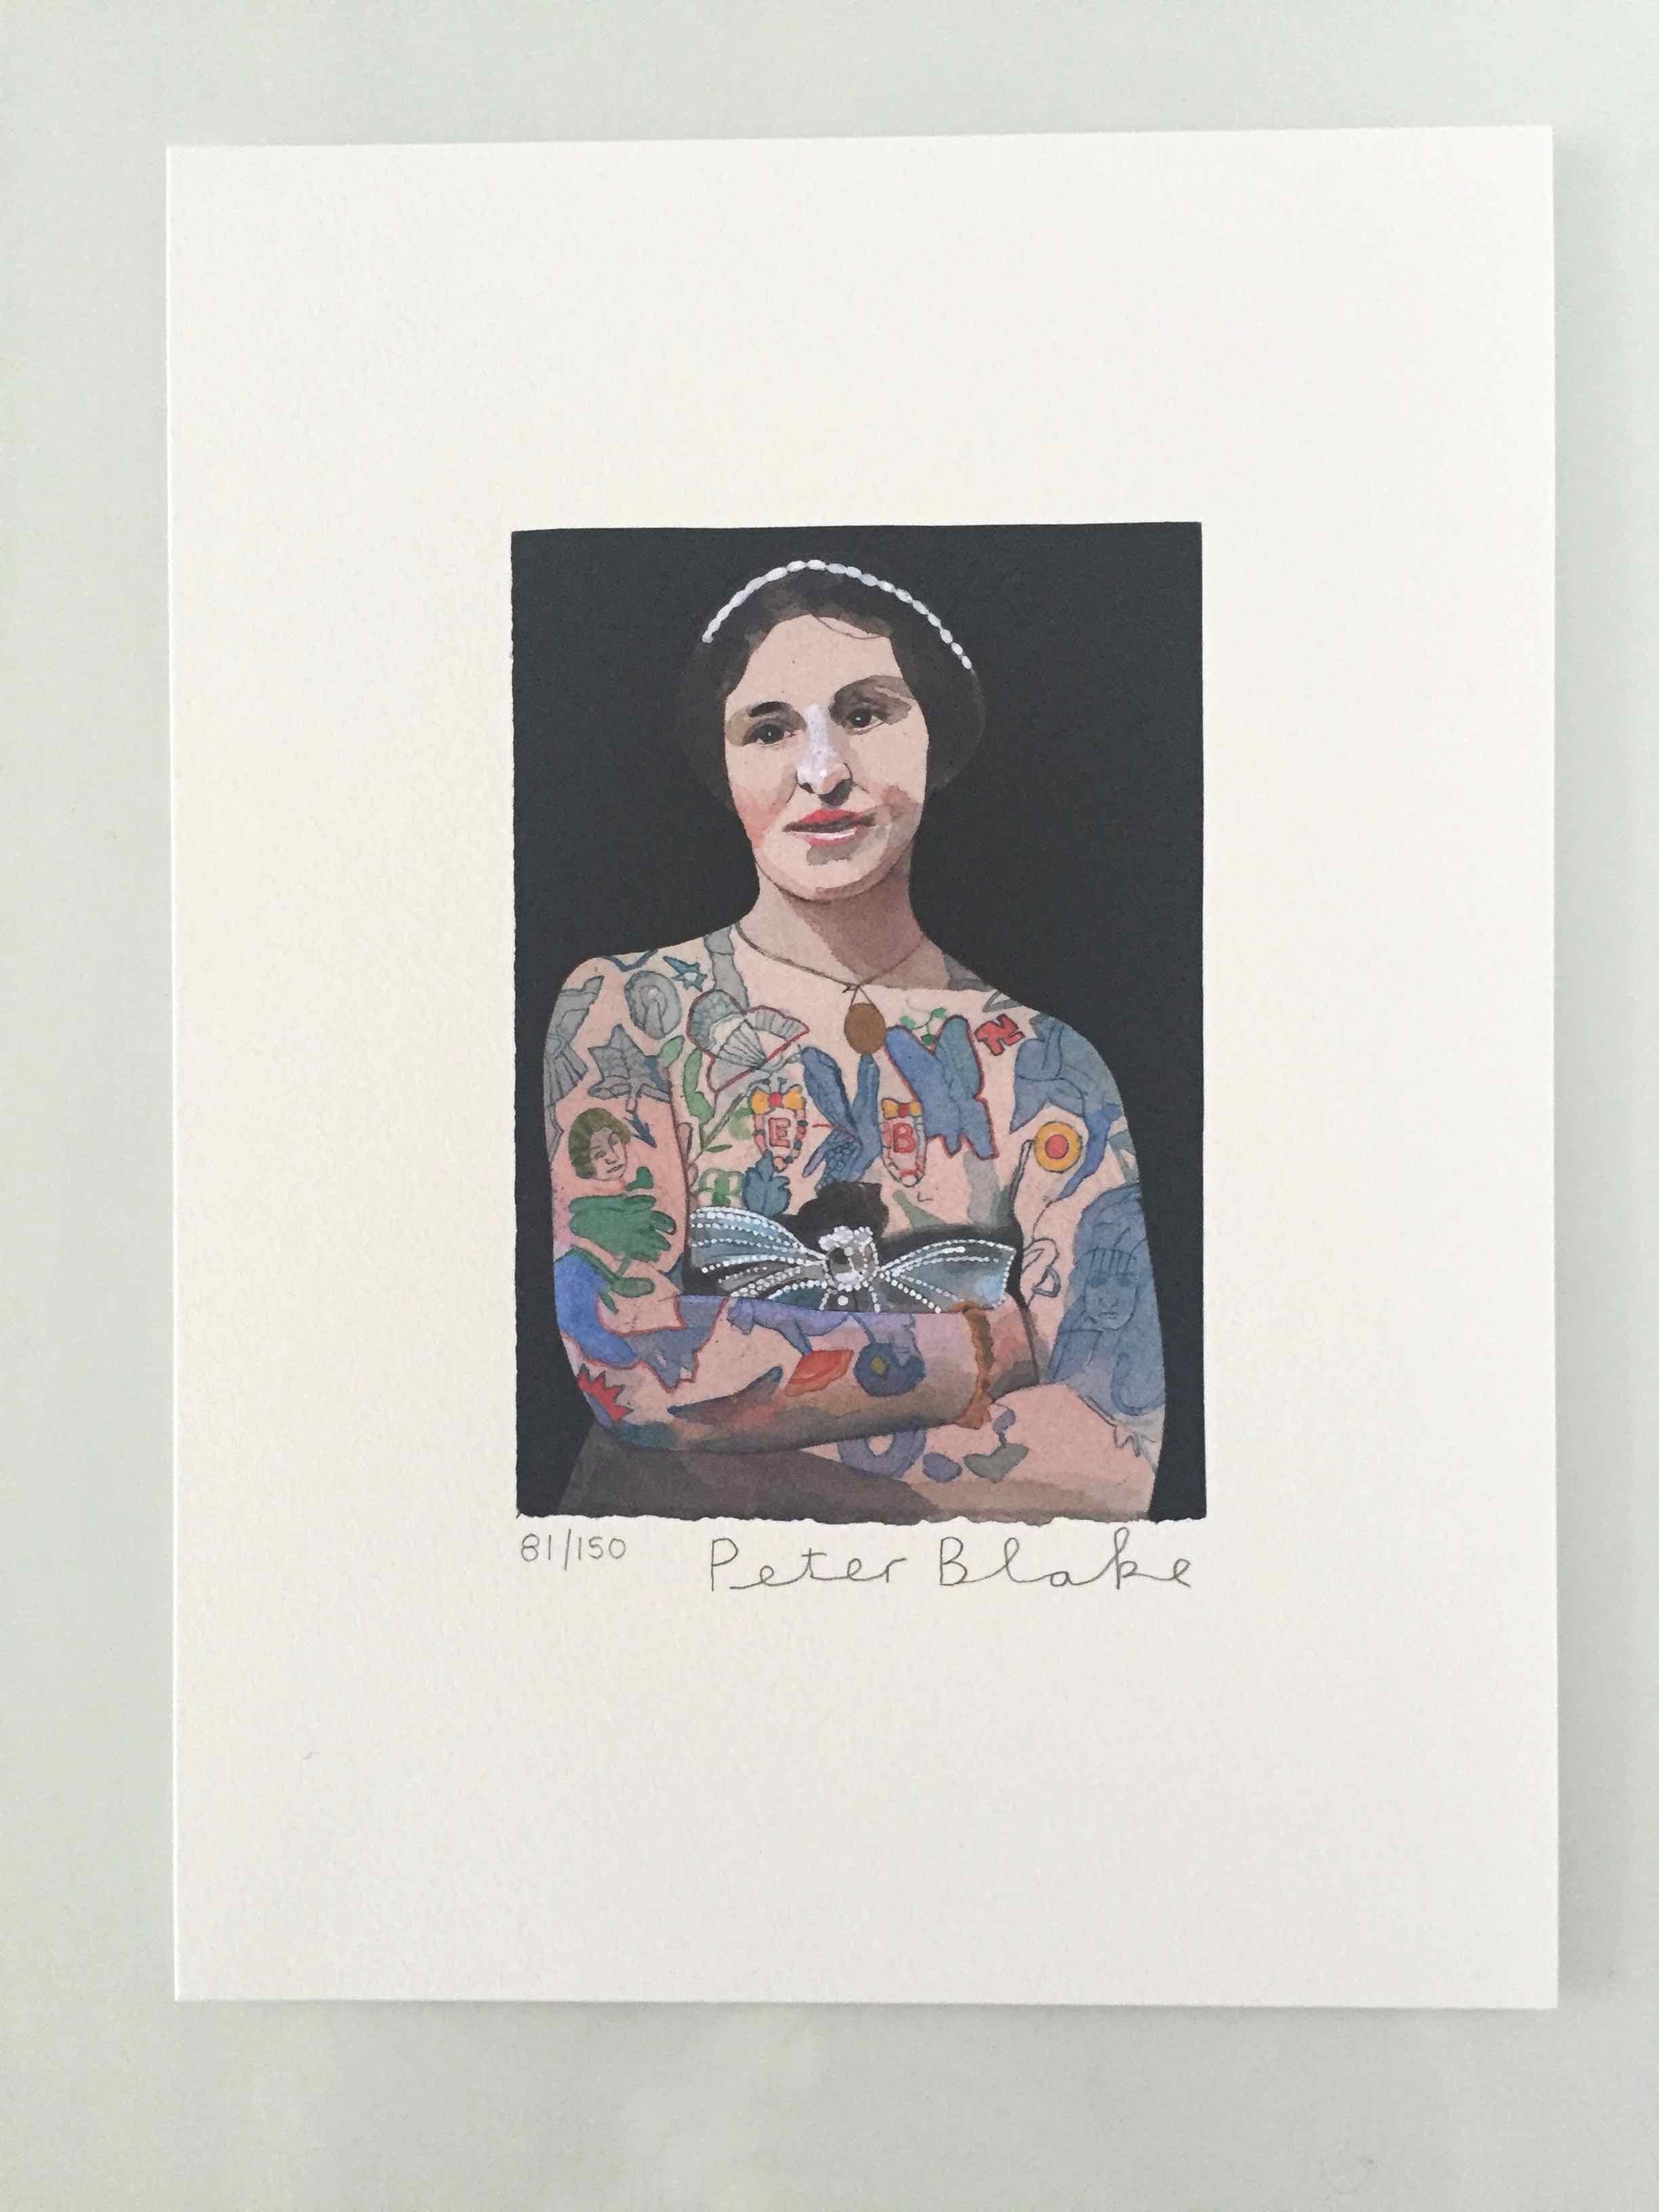 Tattooed People, Emily, 2015, Archival limited edition inkjet print on photo rag satin paper, Edition 80/150, 11 × 8 3/10 in, 28 × 21 cm, signed and numbered by Sir Peter Blake (unframed)

Widely regarded as the godfather of British Pop art and the